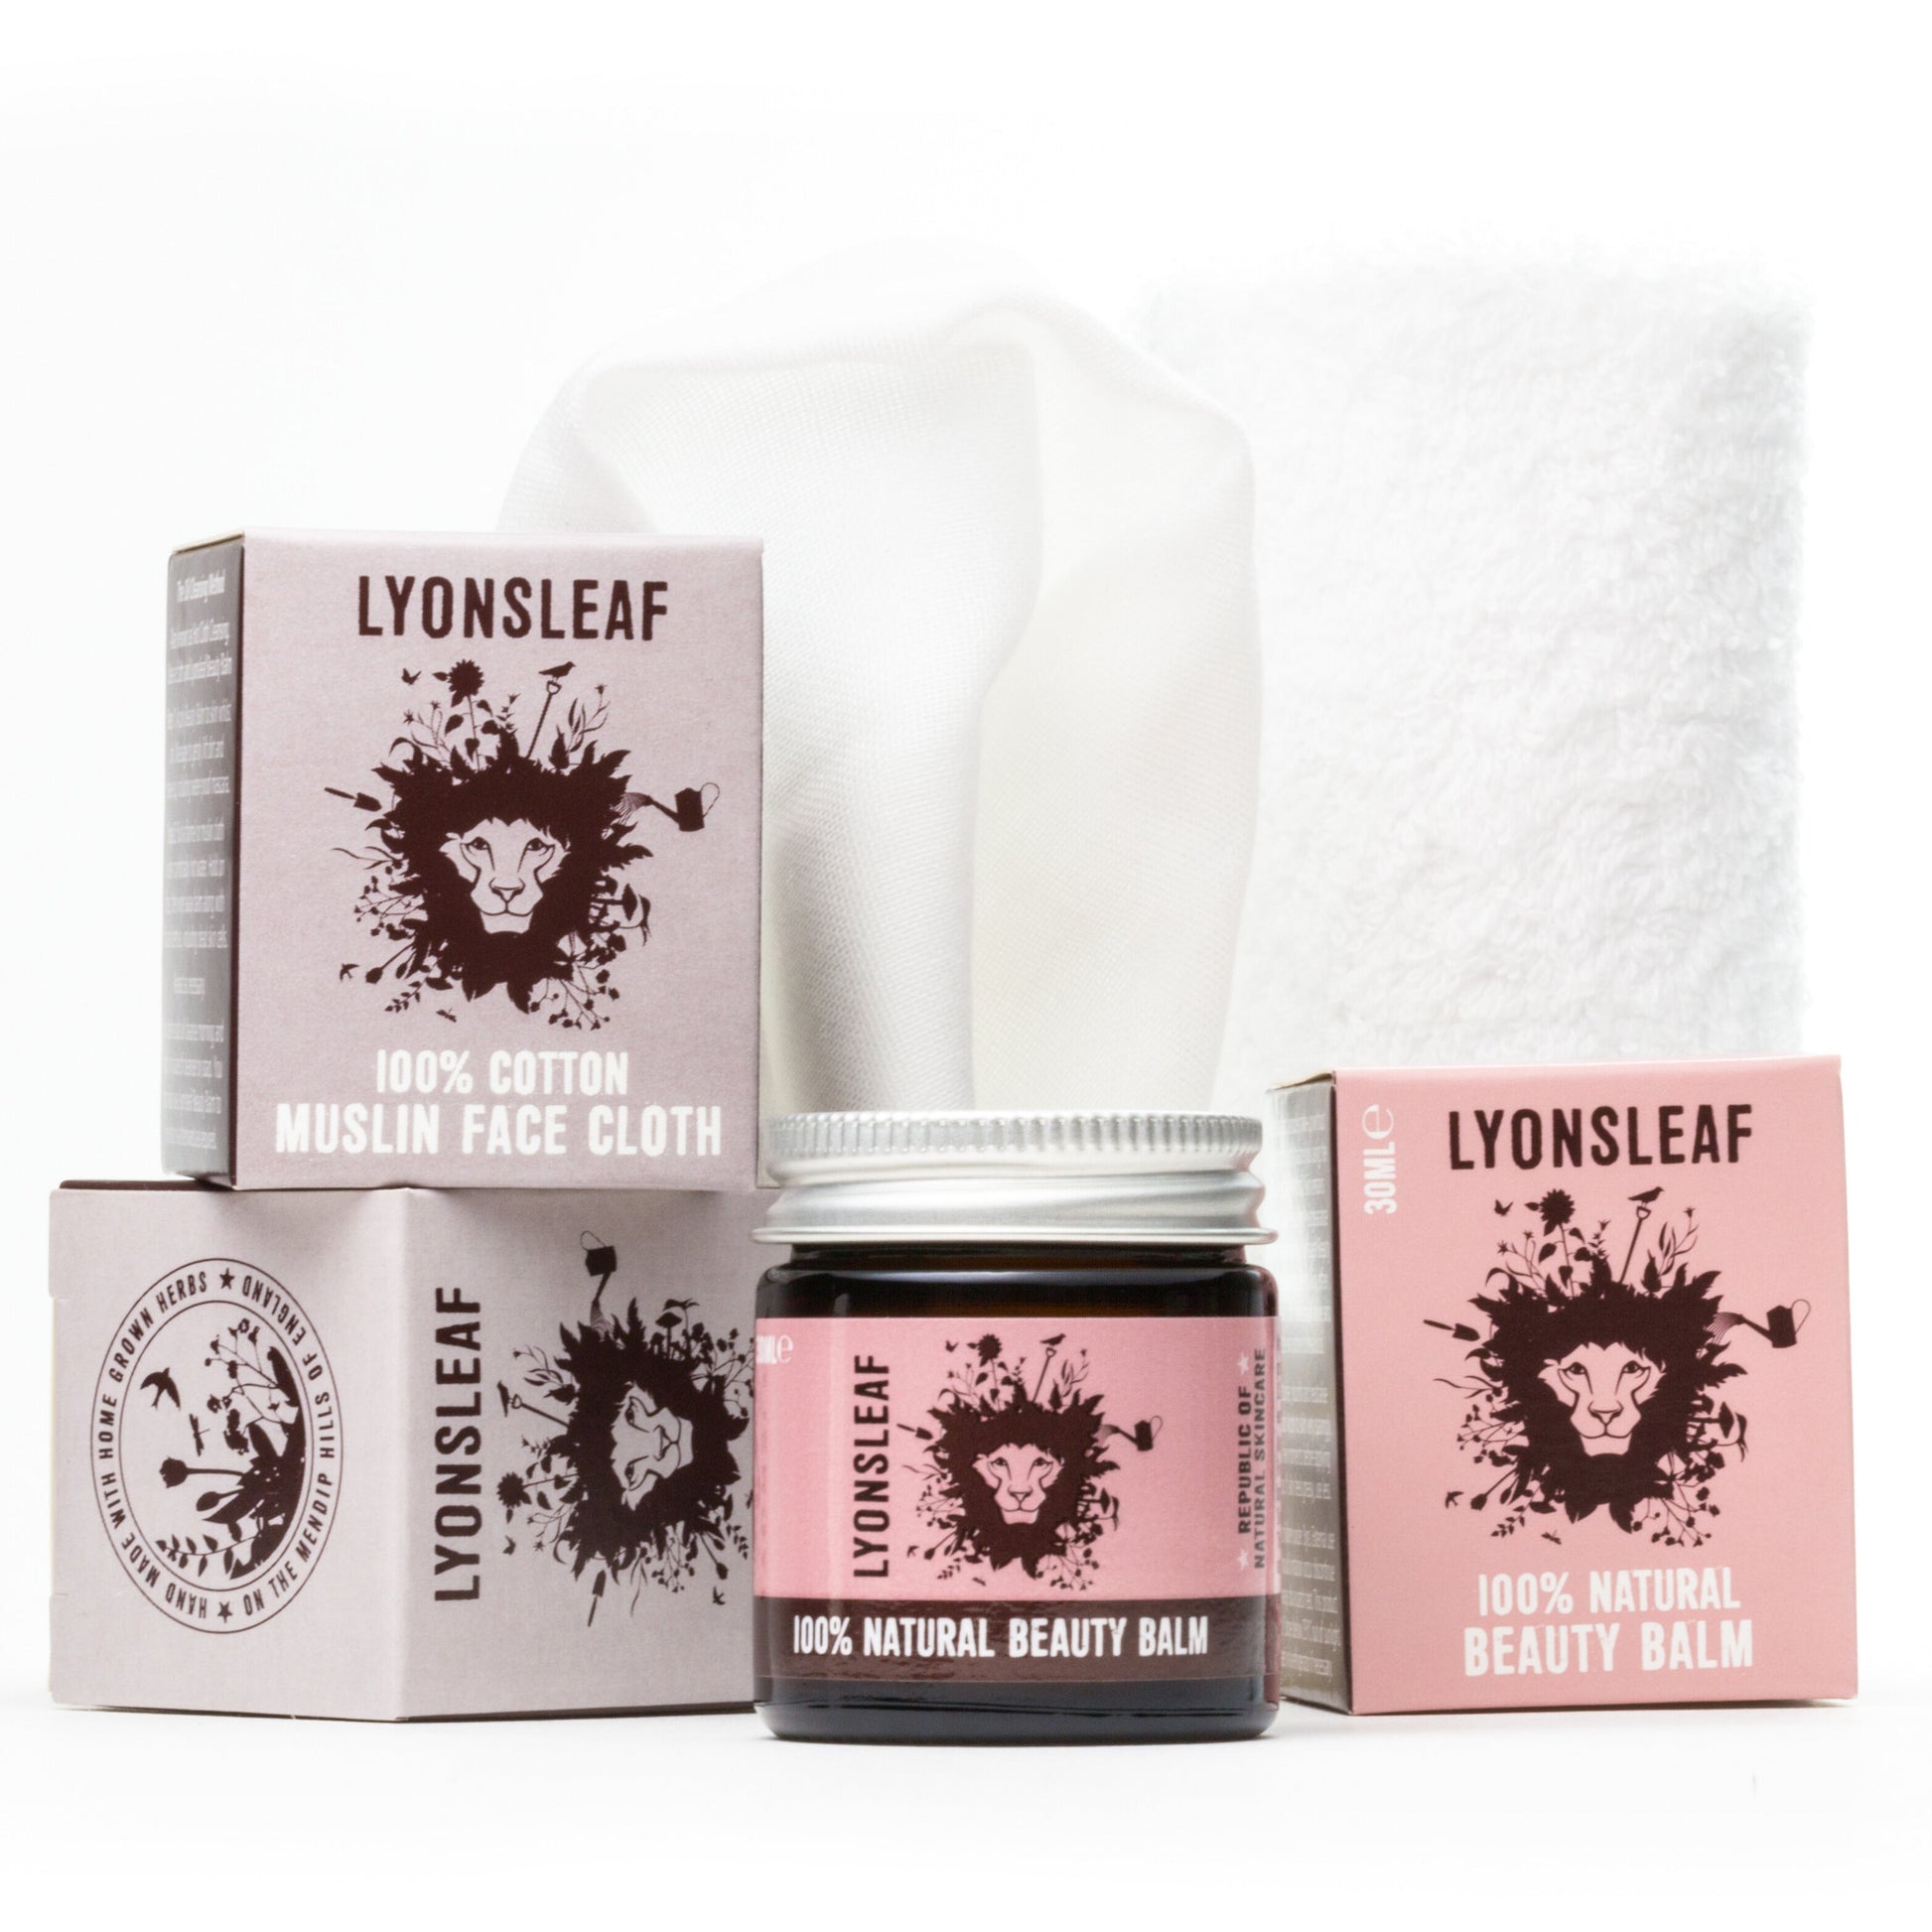 the products that come in the lyonsleaf hot cloth cleansing kit are photographed on a white background. from left to right there is a mauve box that holds the 100% cotton muslin face cloth and is balanced on another purple box. The white 100% cotton cloth is standing upright in a roll in the background. The jar and the box of the 100% natural beauty balm is in the foreground